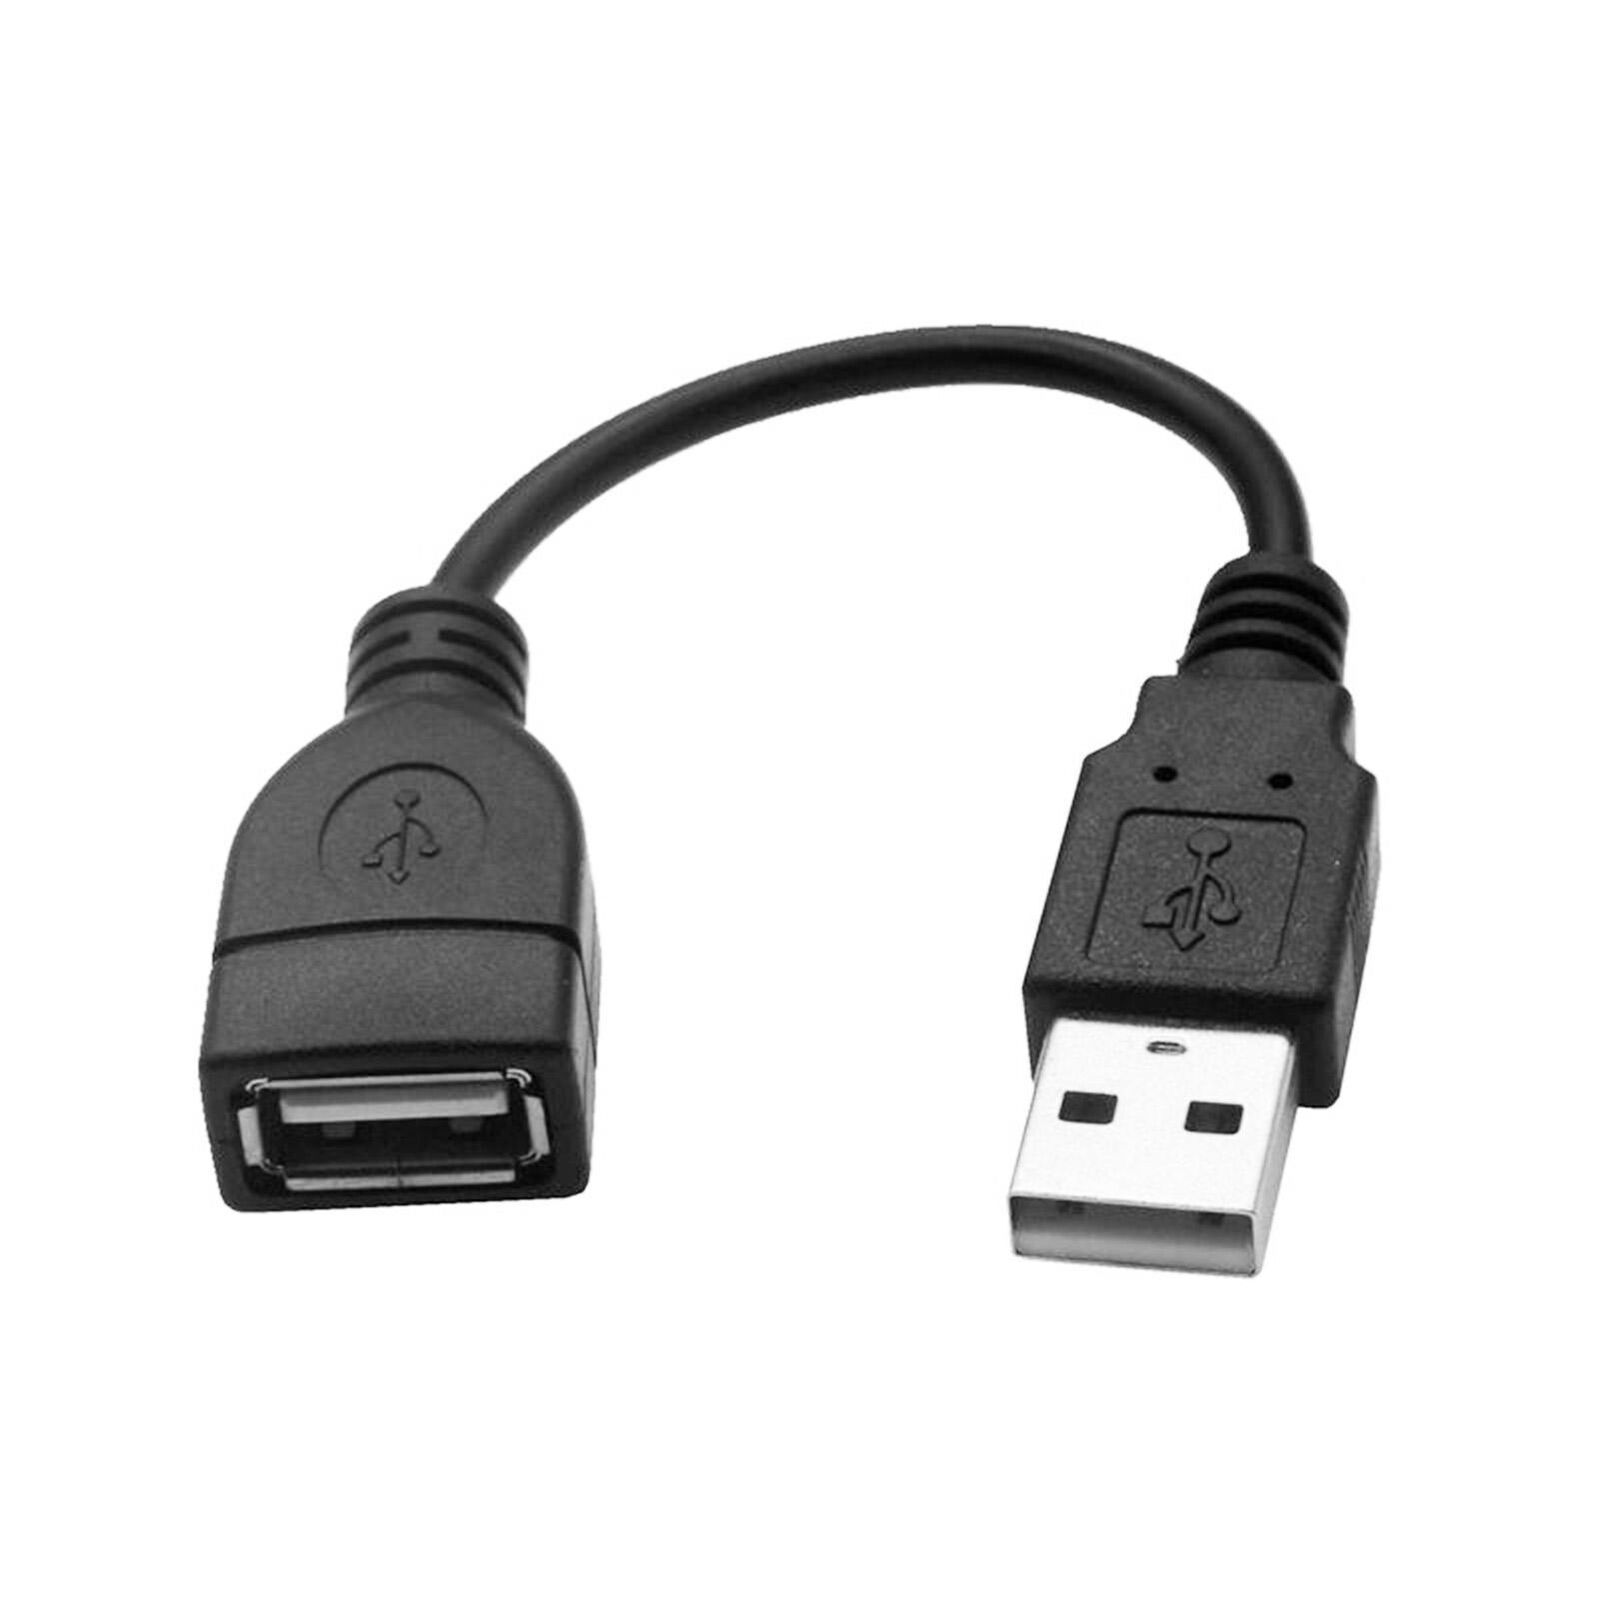 2X USB Extension Cable Male to Female USB 2.0 Extension Cord Fast Data Transfer